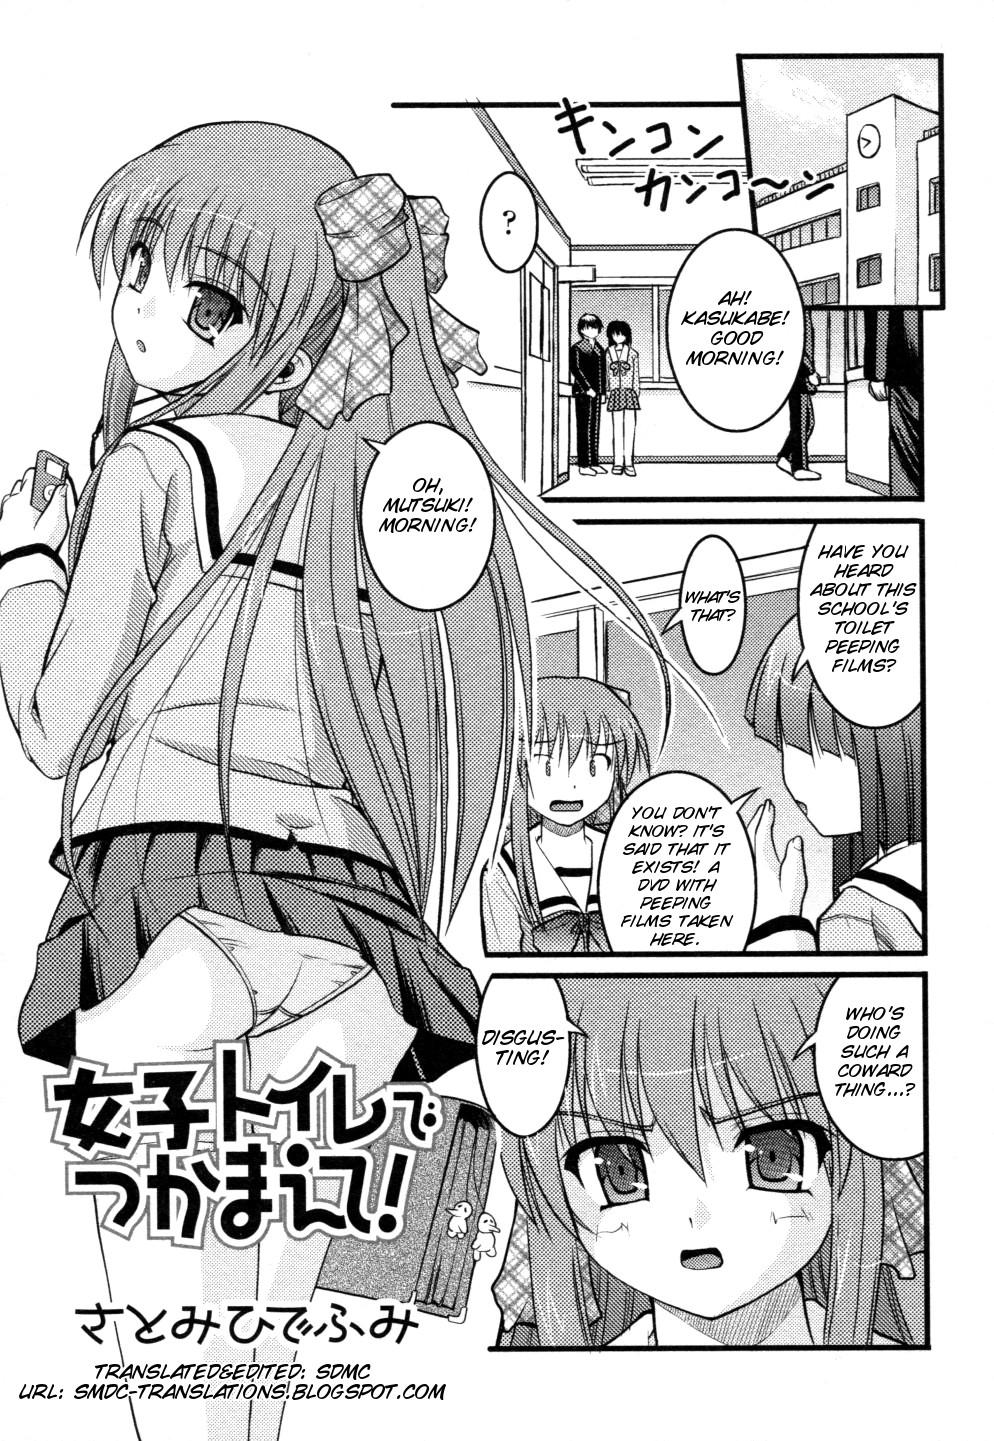 Emo [Anthology Nozoite wa Ikenai 3](do not peep 3) ep4 [Satomi Hidefumi] - The Catcher in The Girl's Room(Eng) Fist - Page 3